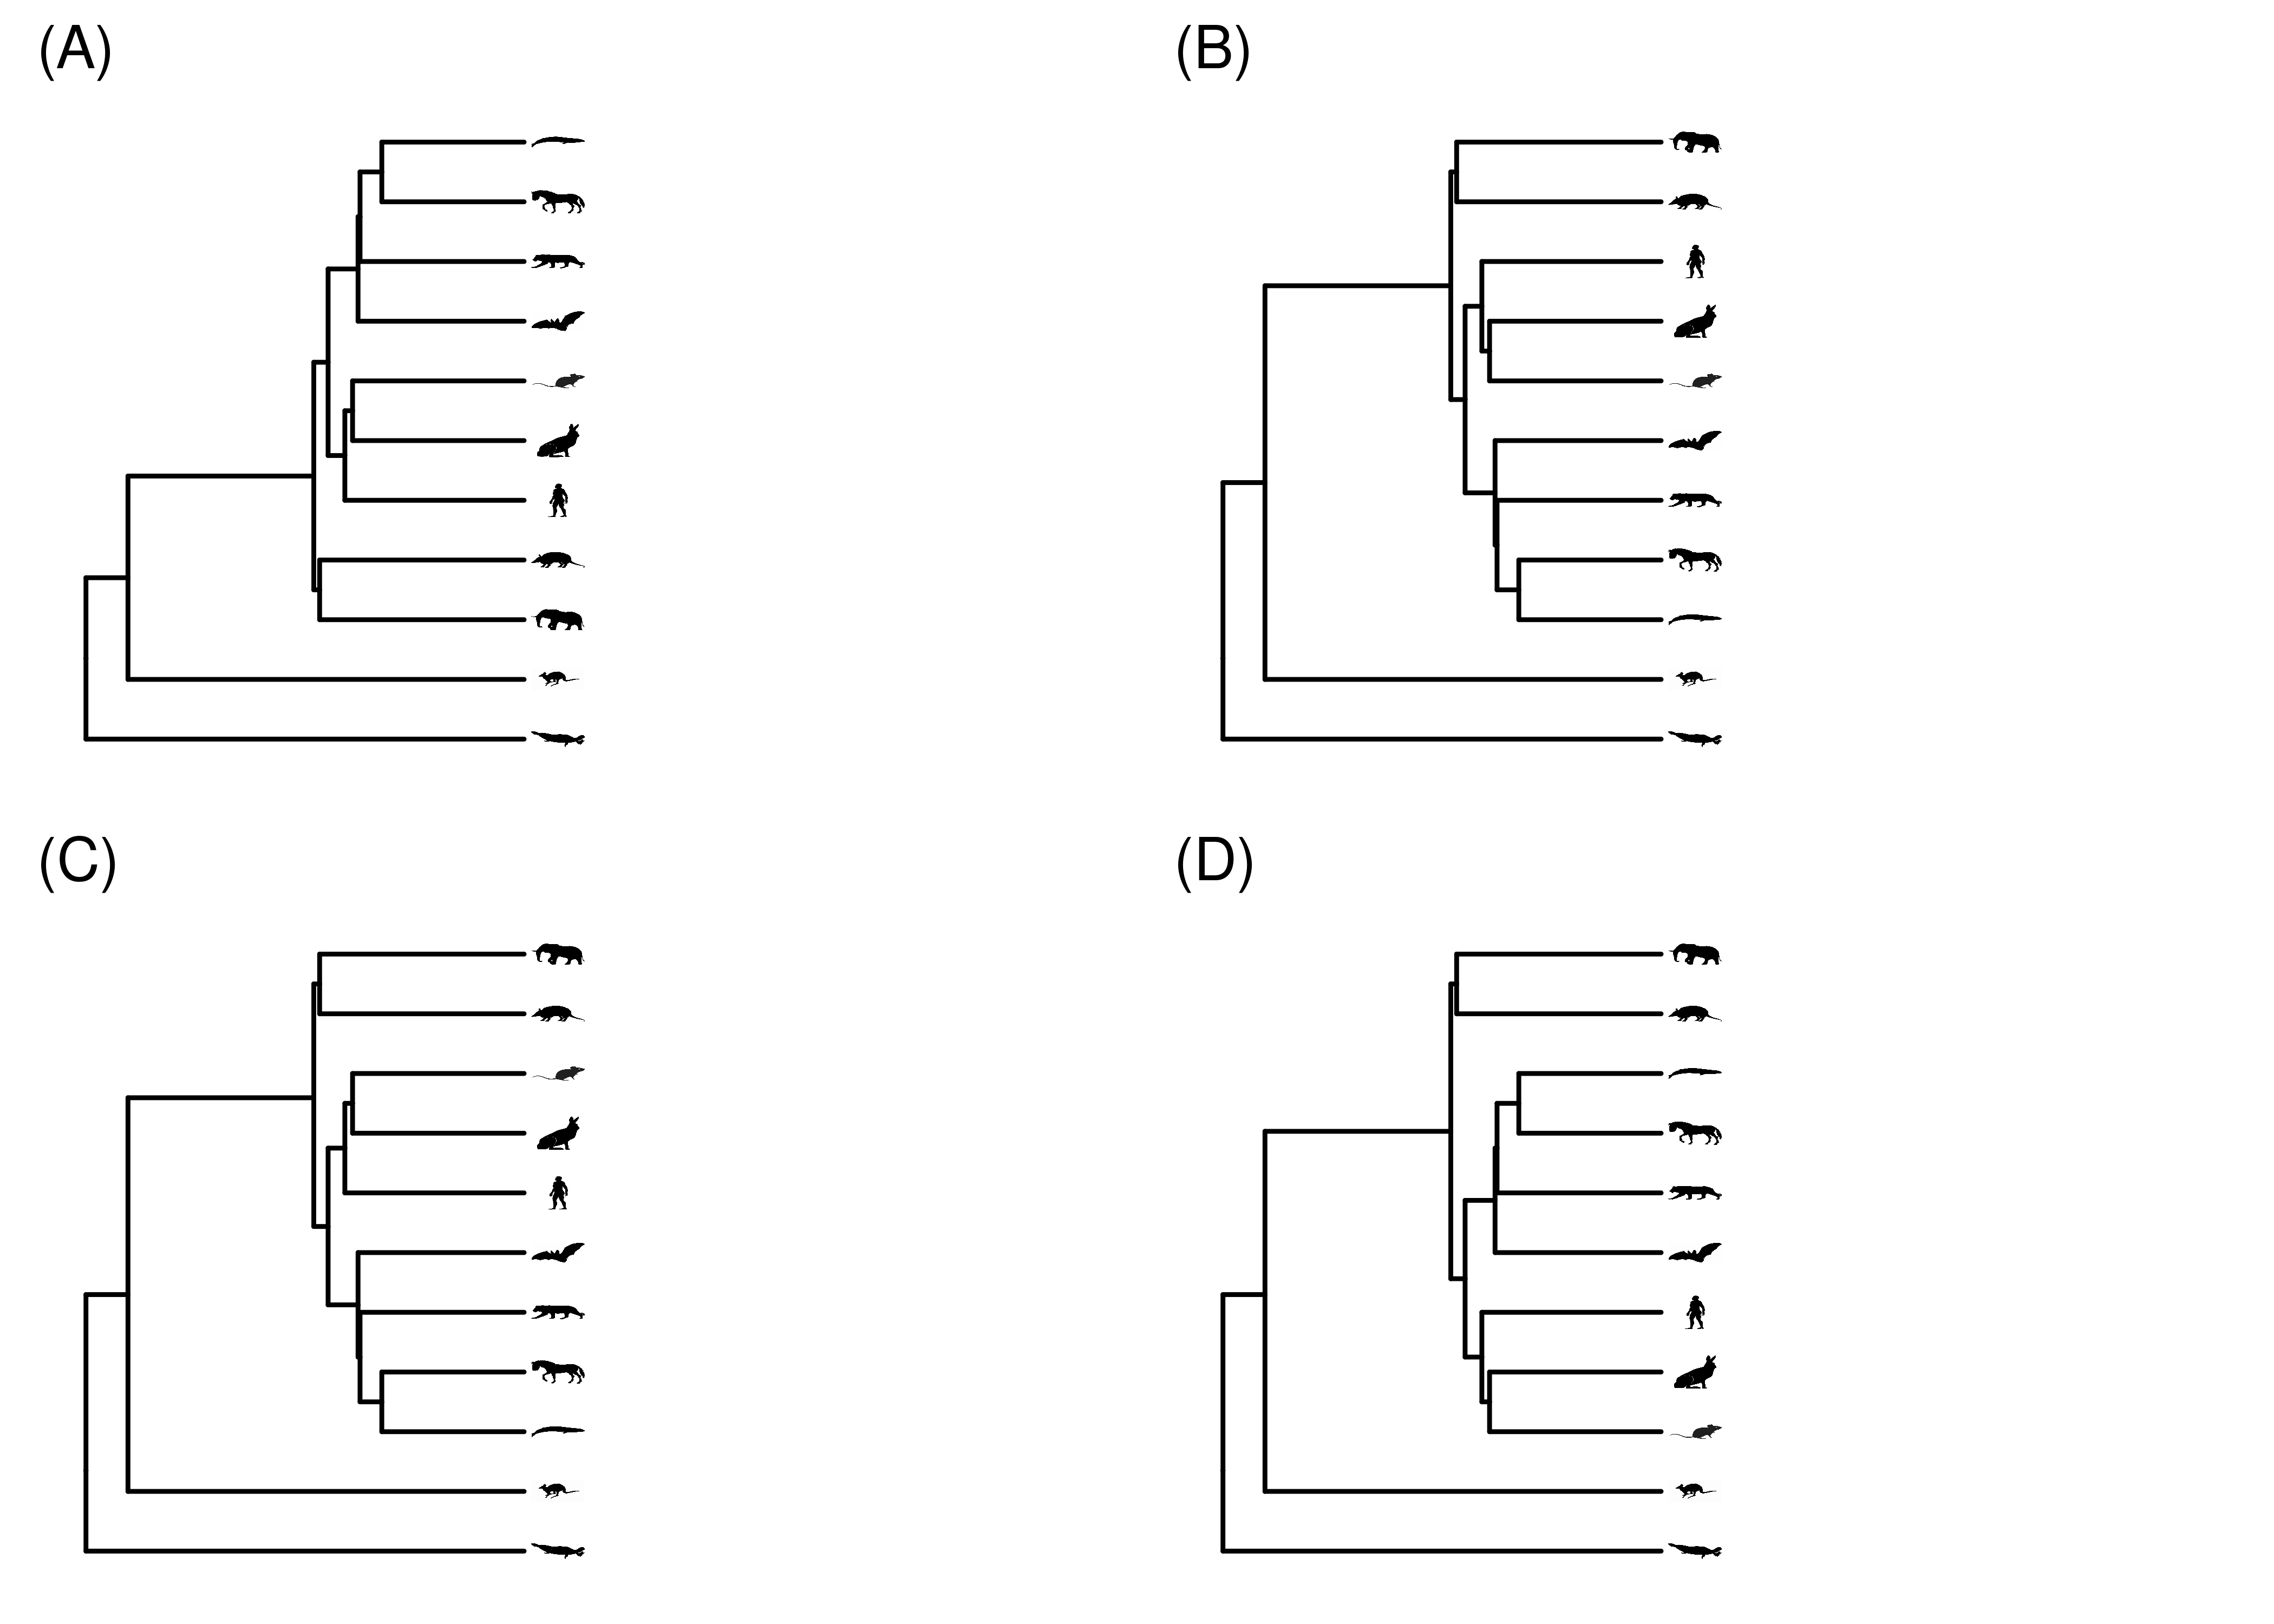 The exact same phylogeny, drawn a few times with different node rotations.